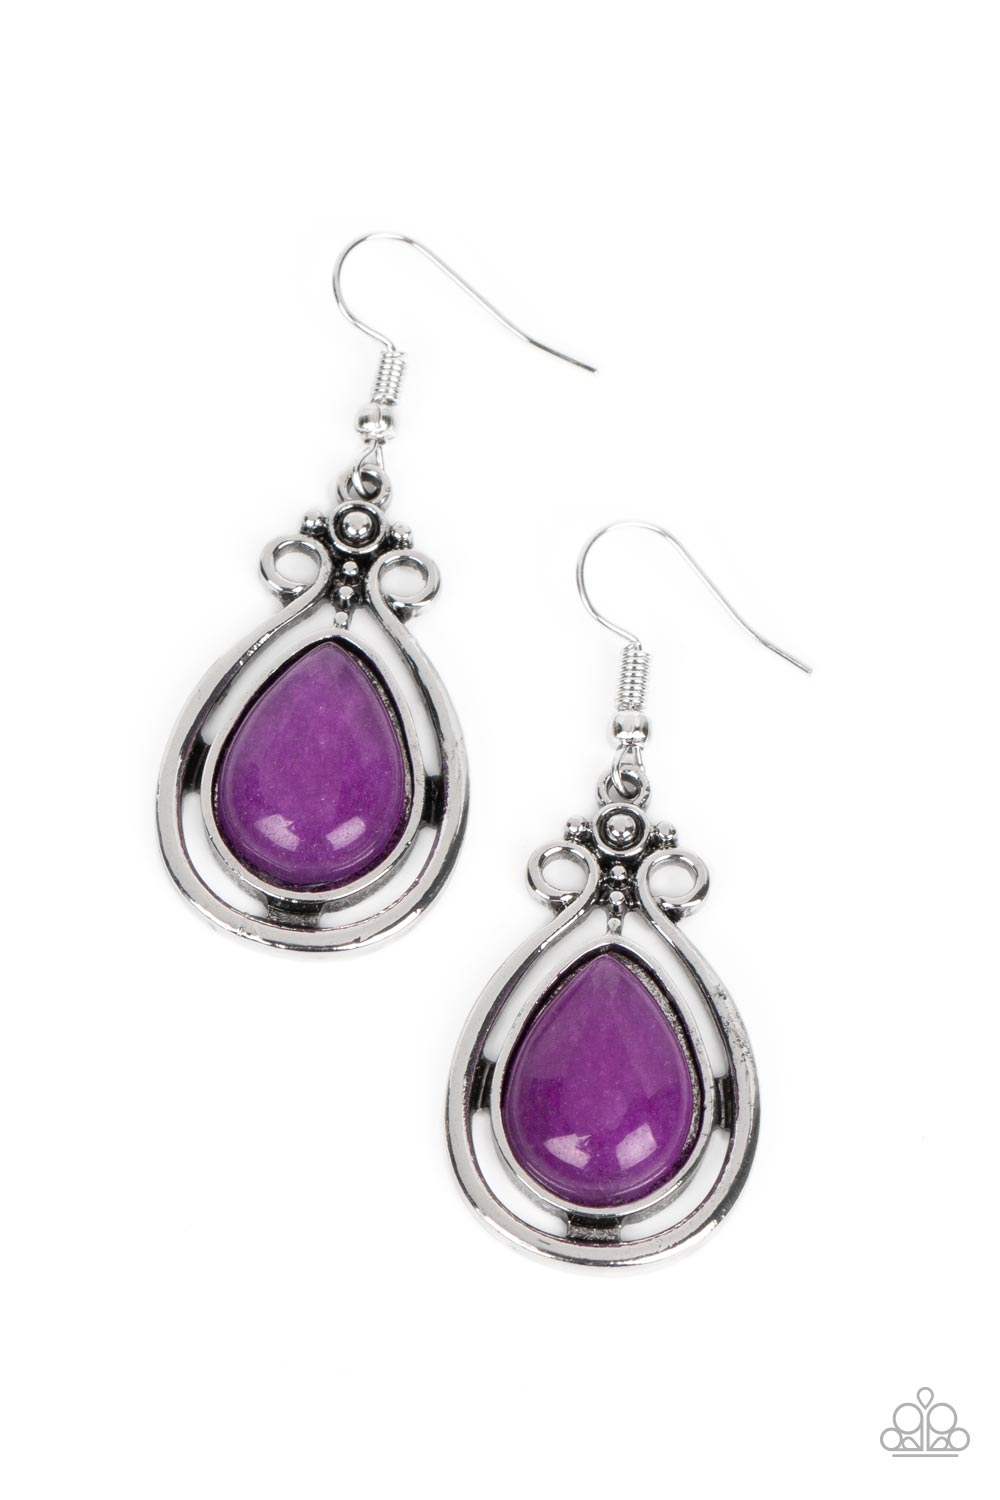 Mountain Mantra Purple Stone Earrings - Paparazzi Accessories- lightbox - CarasShop.com - $5 Jewelry by Cara Jewels